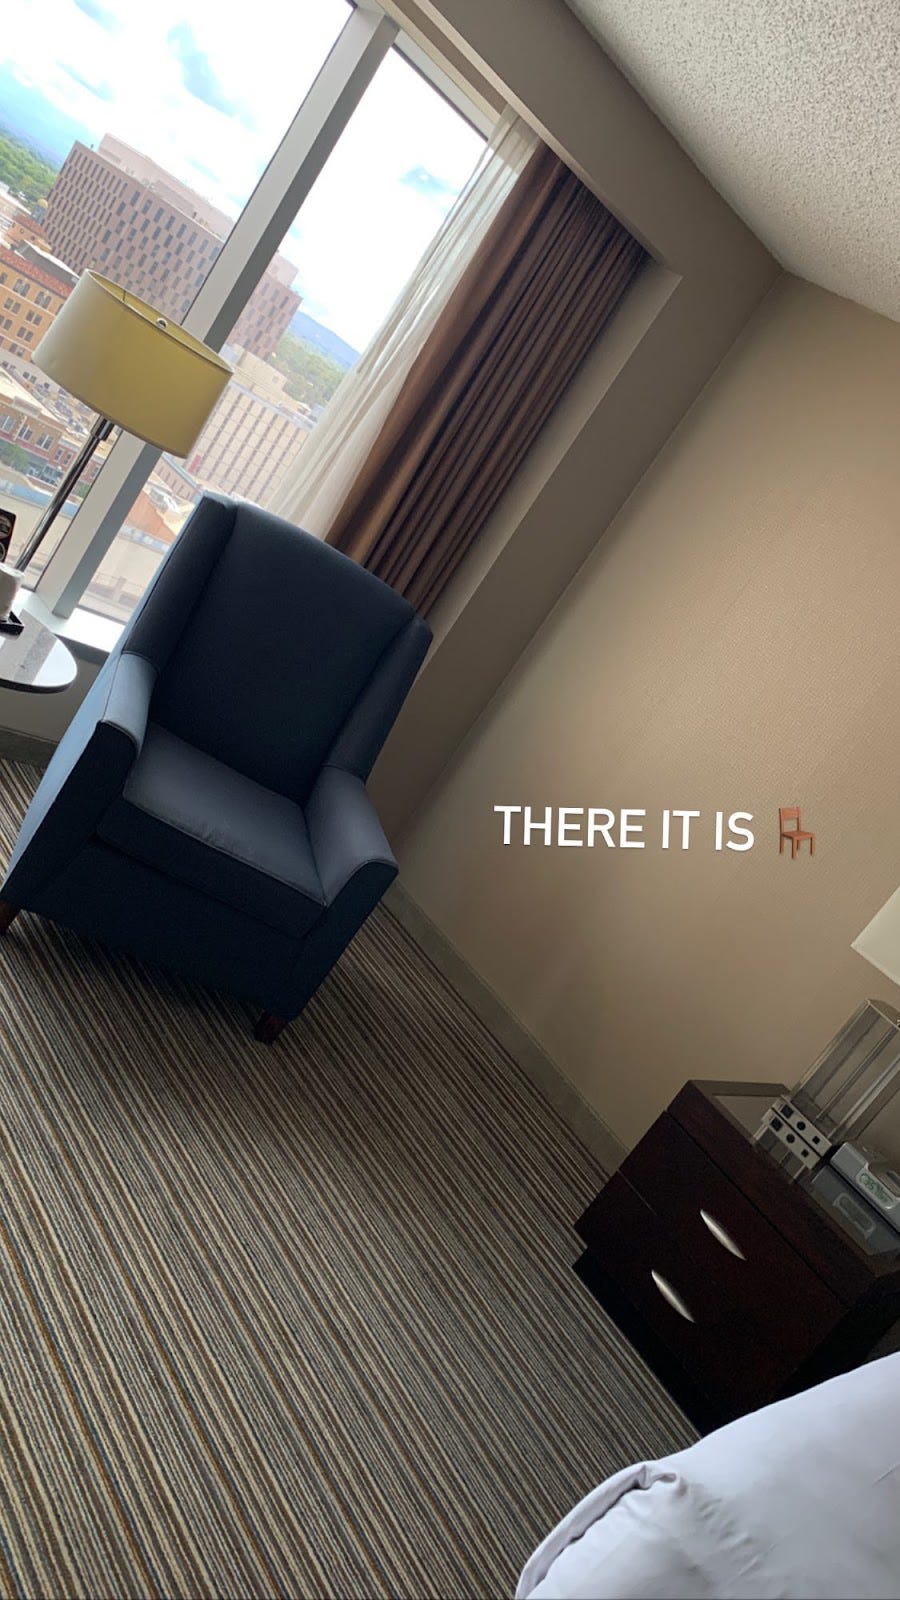 20 North American Cities, 20 Hotel Room Chairs A Travelers Review by Aleksey (Aleks) Weyman Medium picture